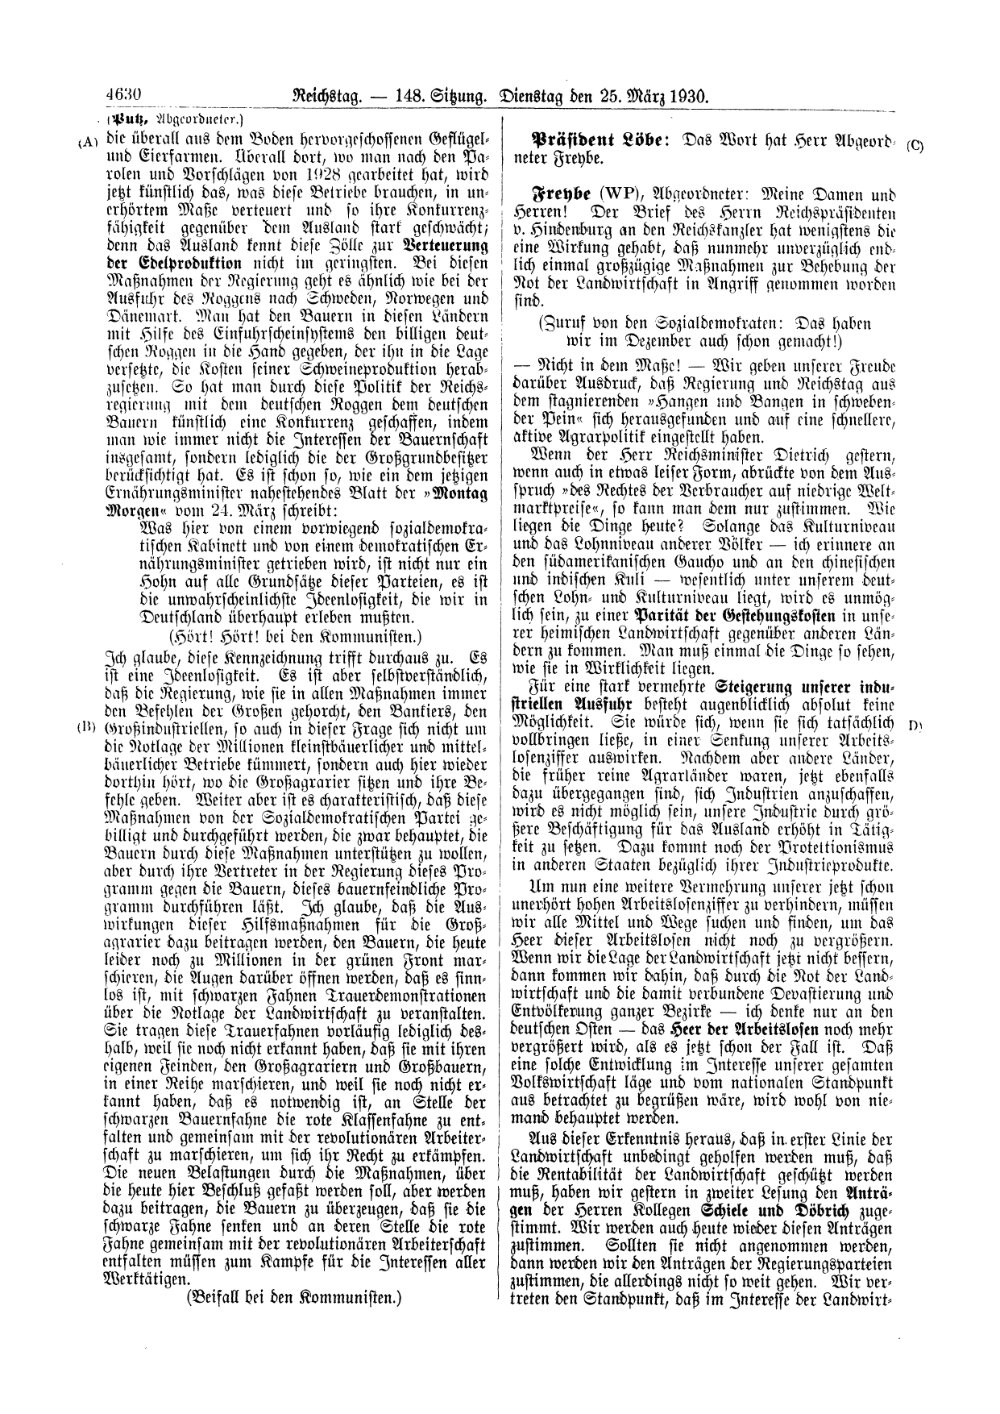 Scan of page 4630